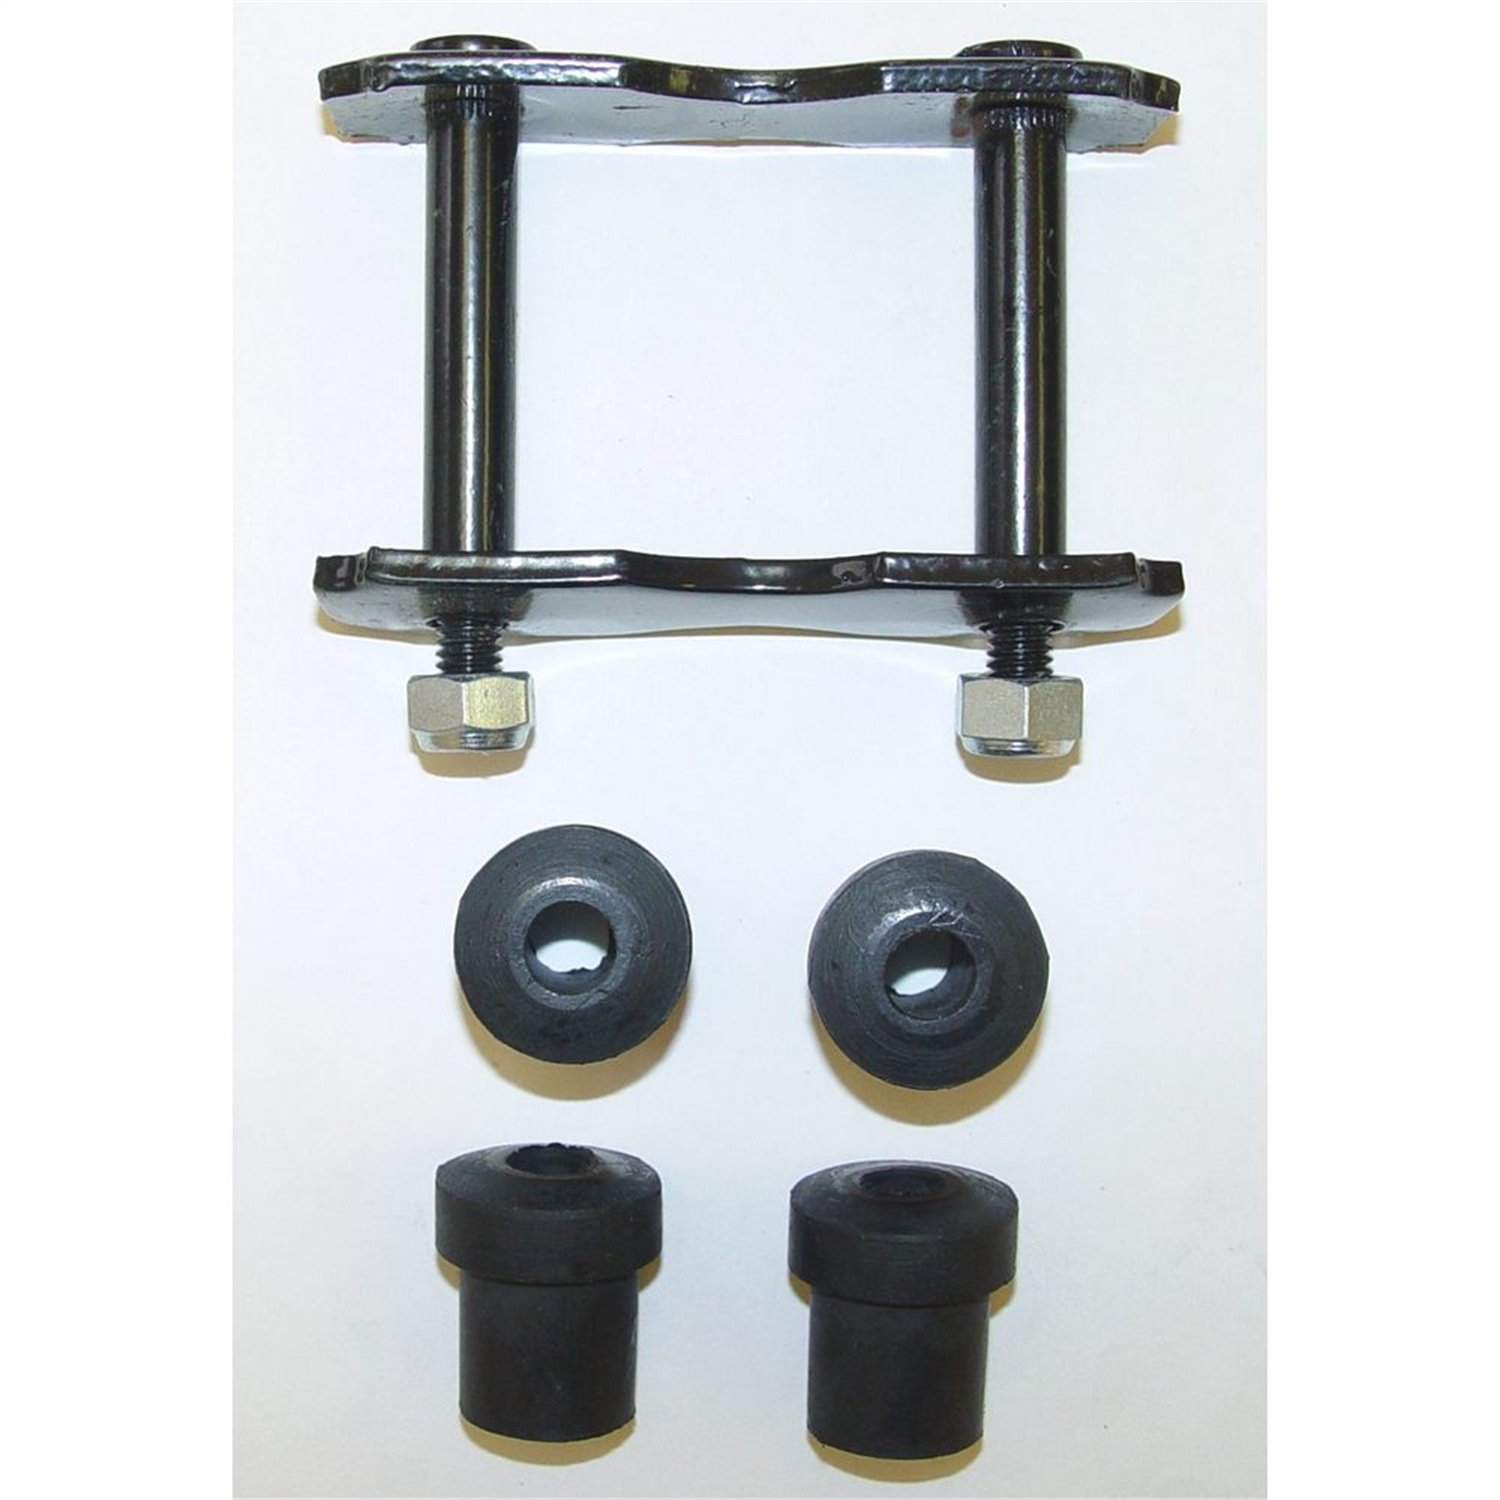 Replacement front leaf spring shackle kit from Omix-ADA,